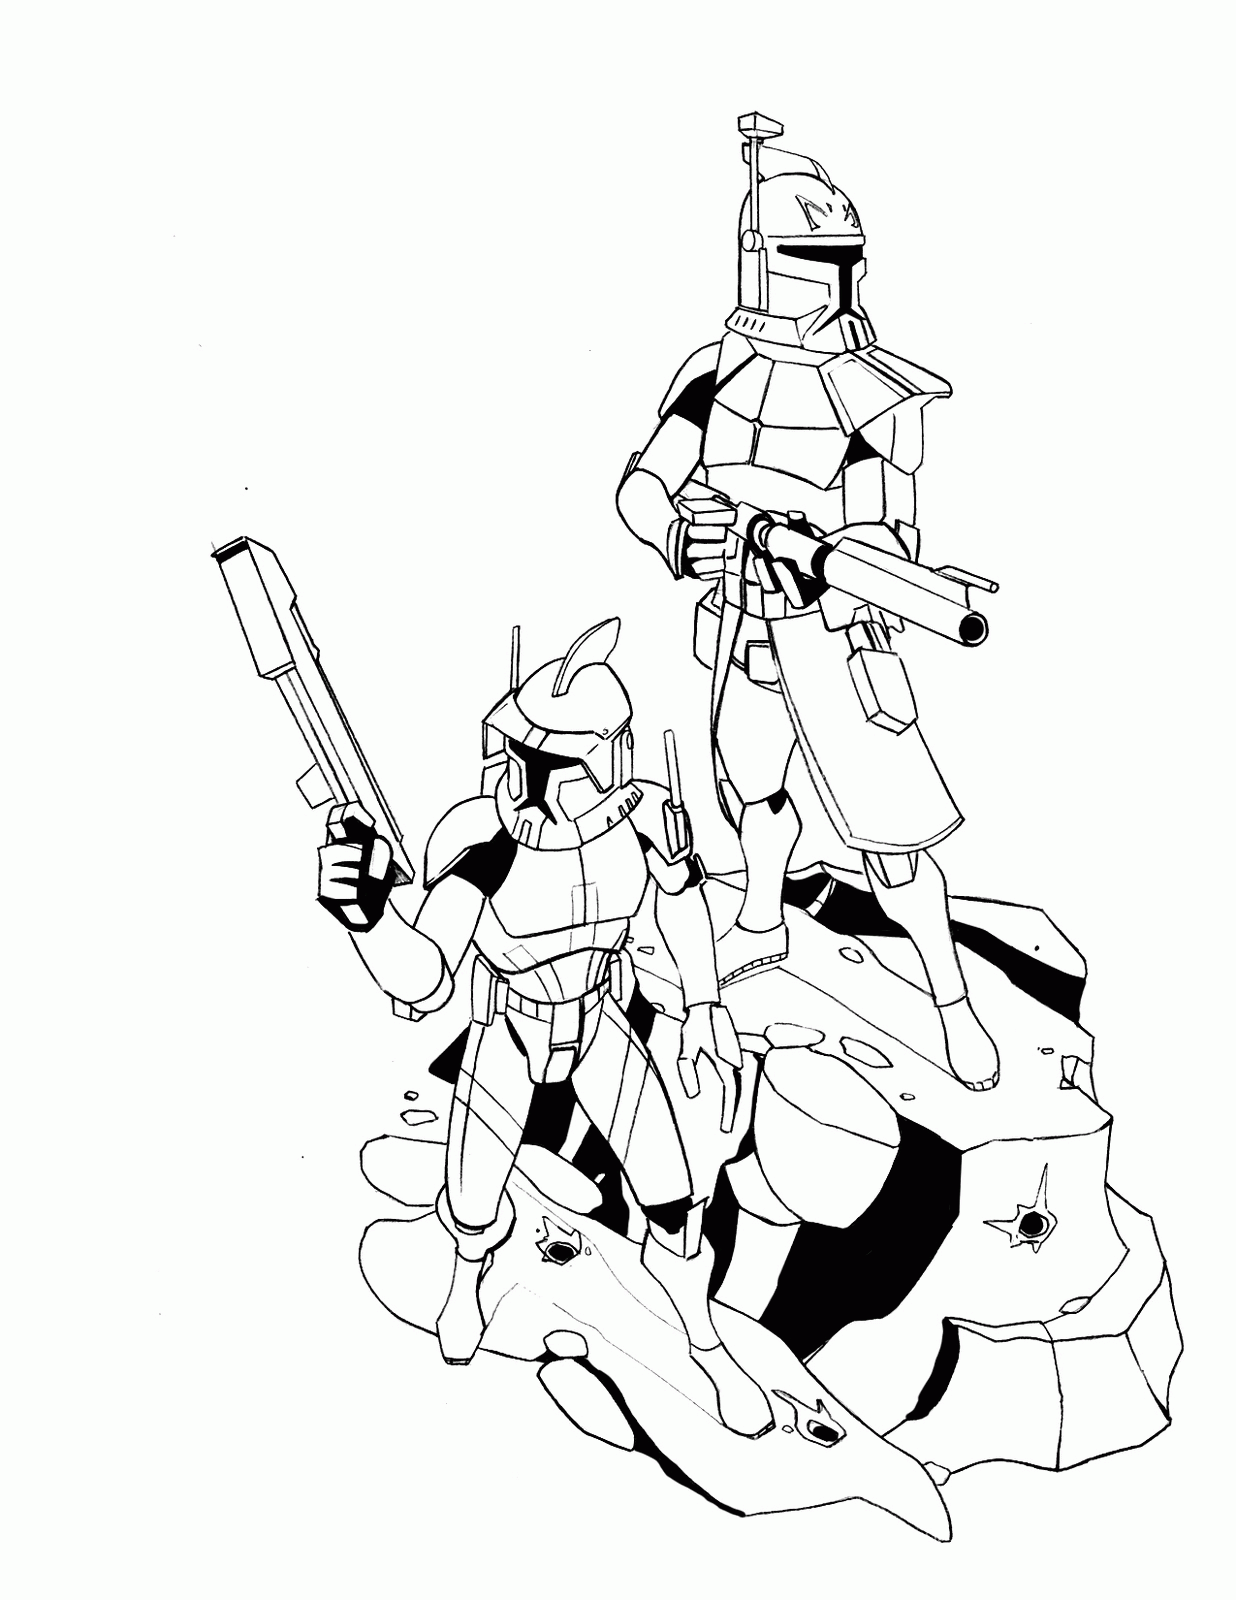 Clip Arts Related To : clone trooper coloring page. view all Star Wars Ca.....